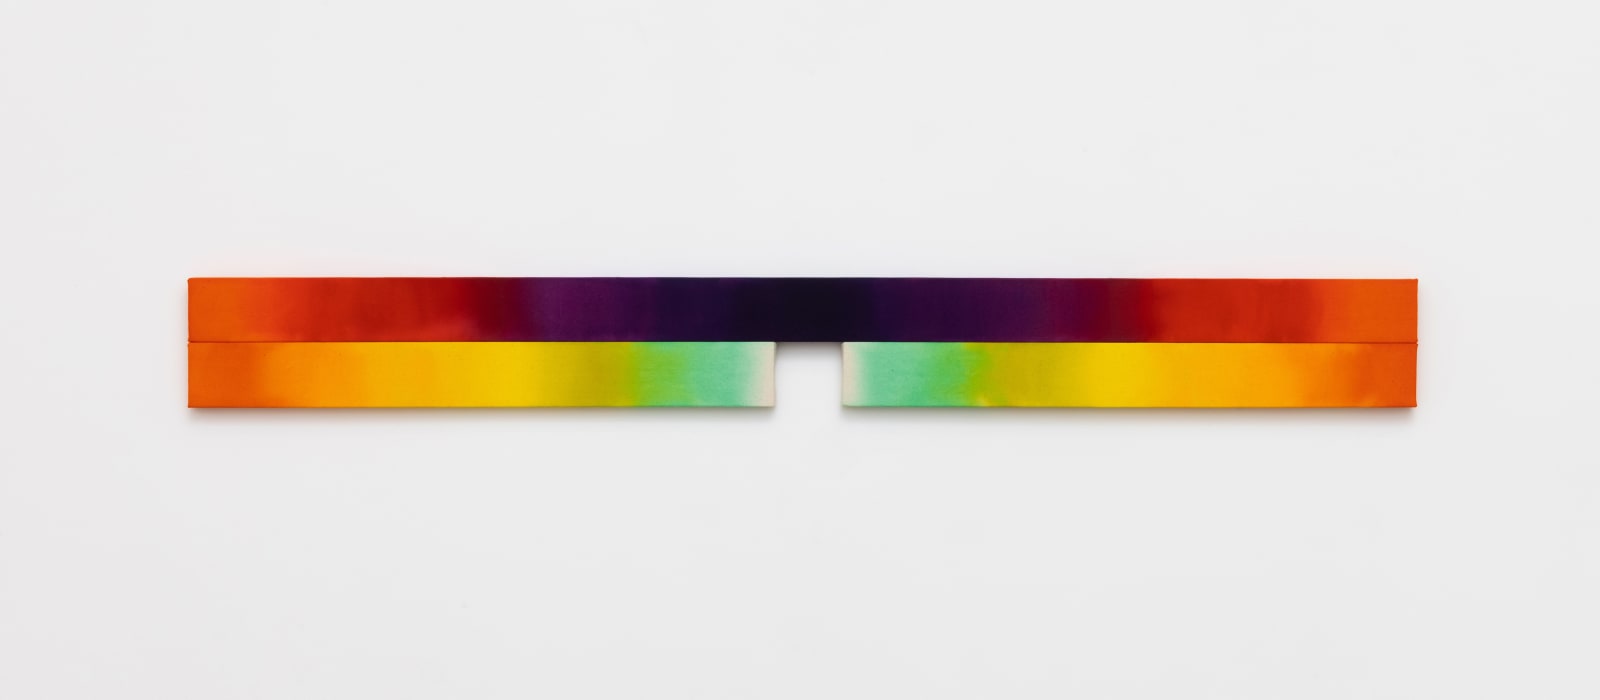 Horizontal shaped canvas painting stretched on three wooden bars varying in length and colors of the rainbow. 